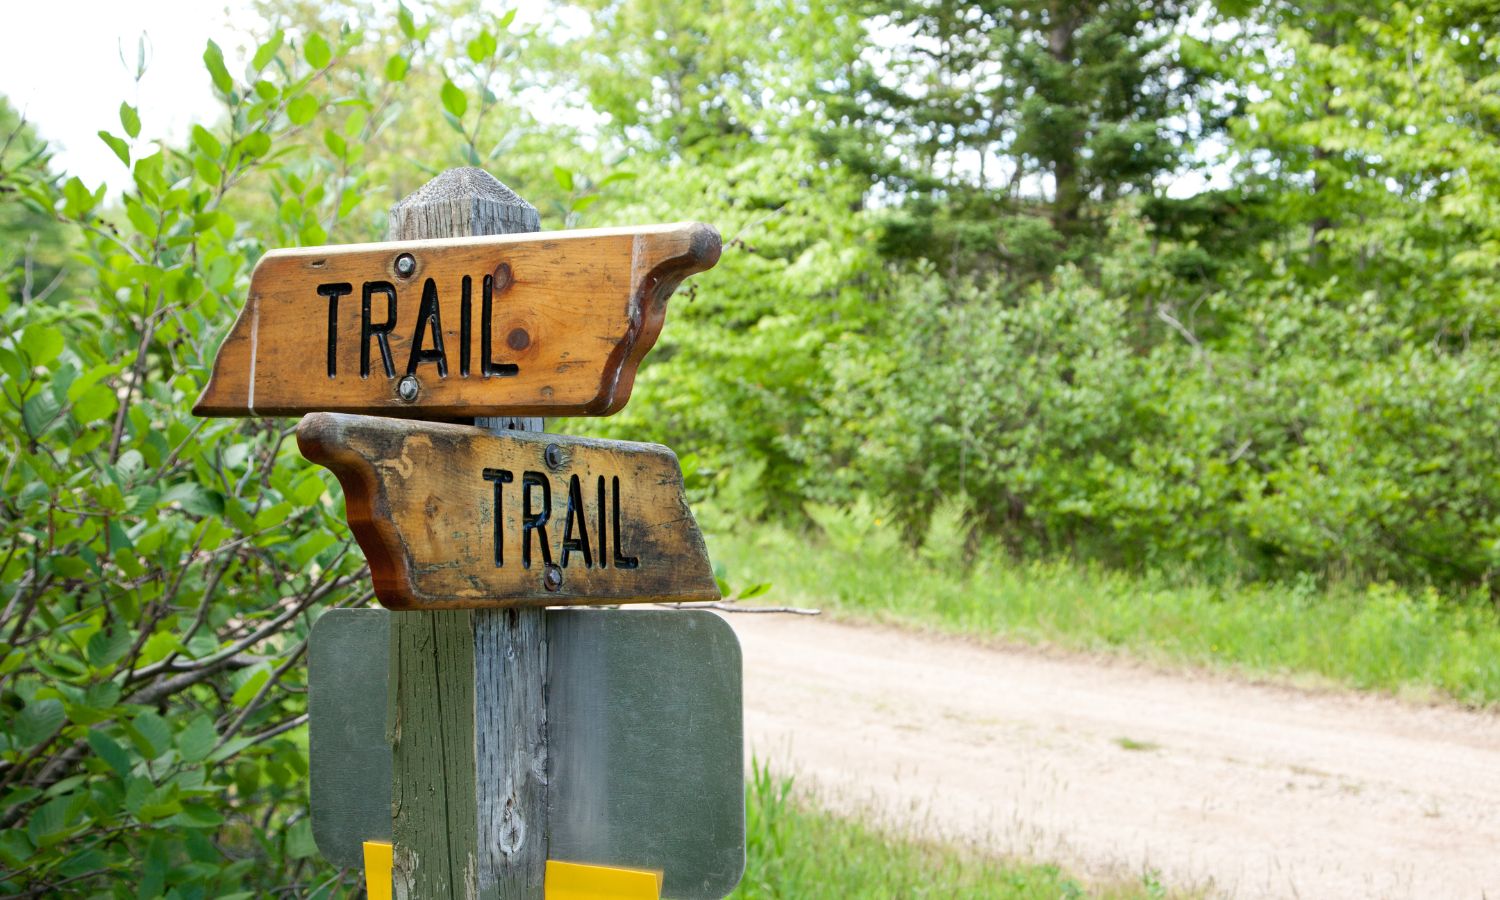 Two trail signs